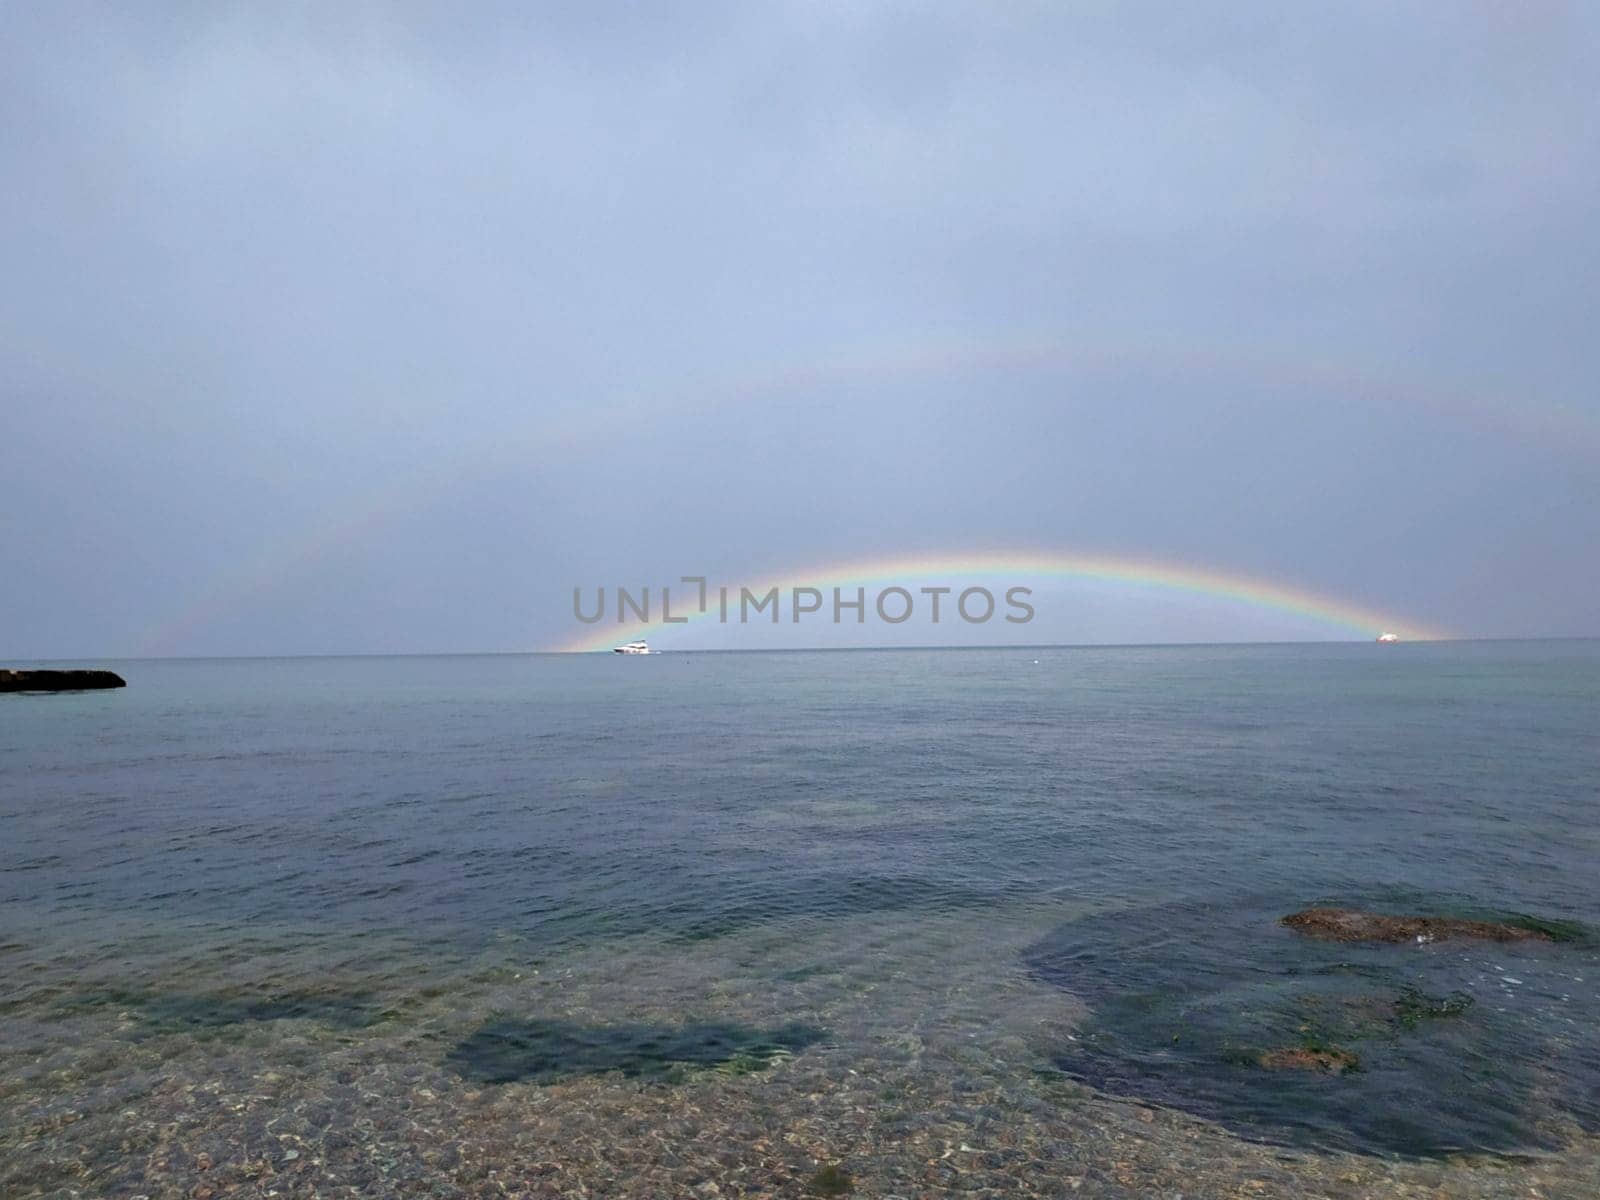 In spring, the water in the Black Sea is clear. A rainbow is visible on the horizon.